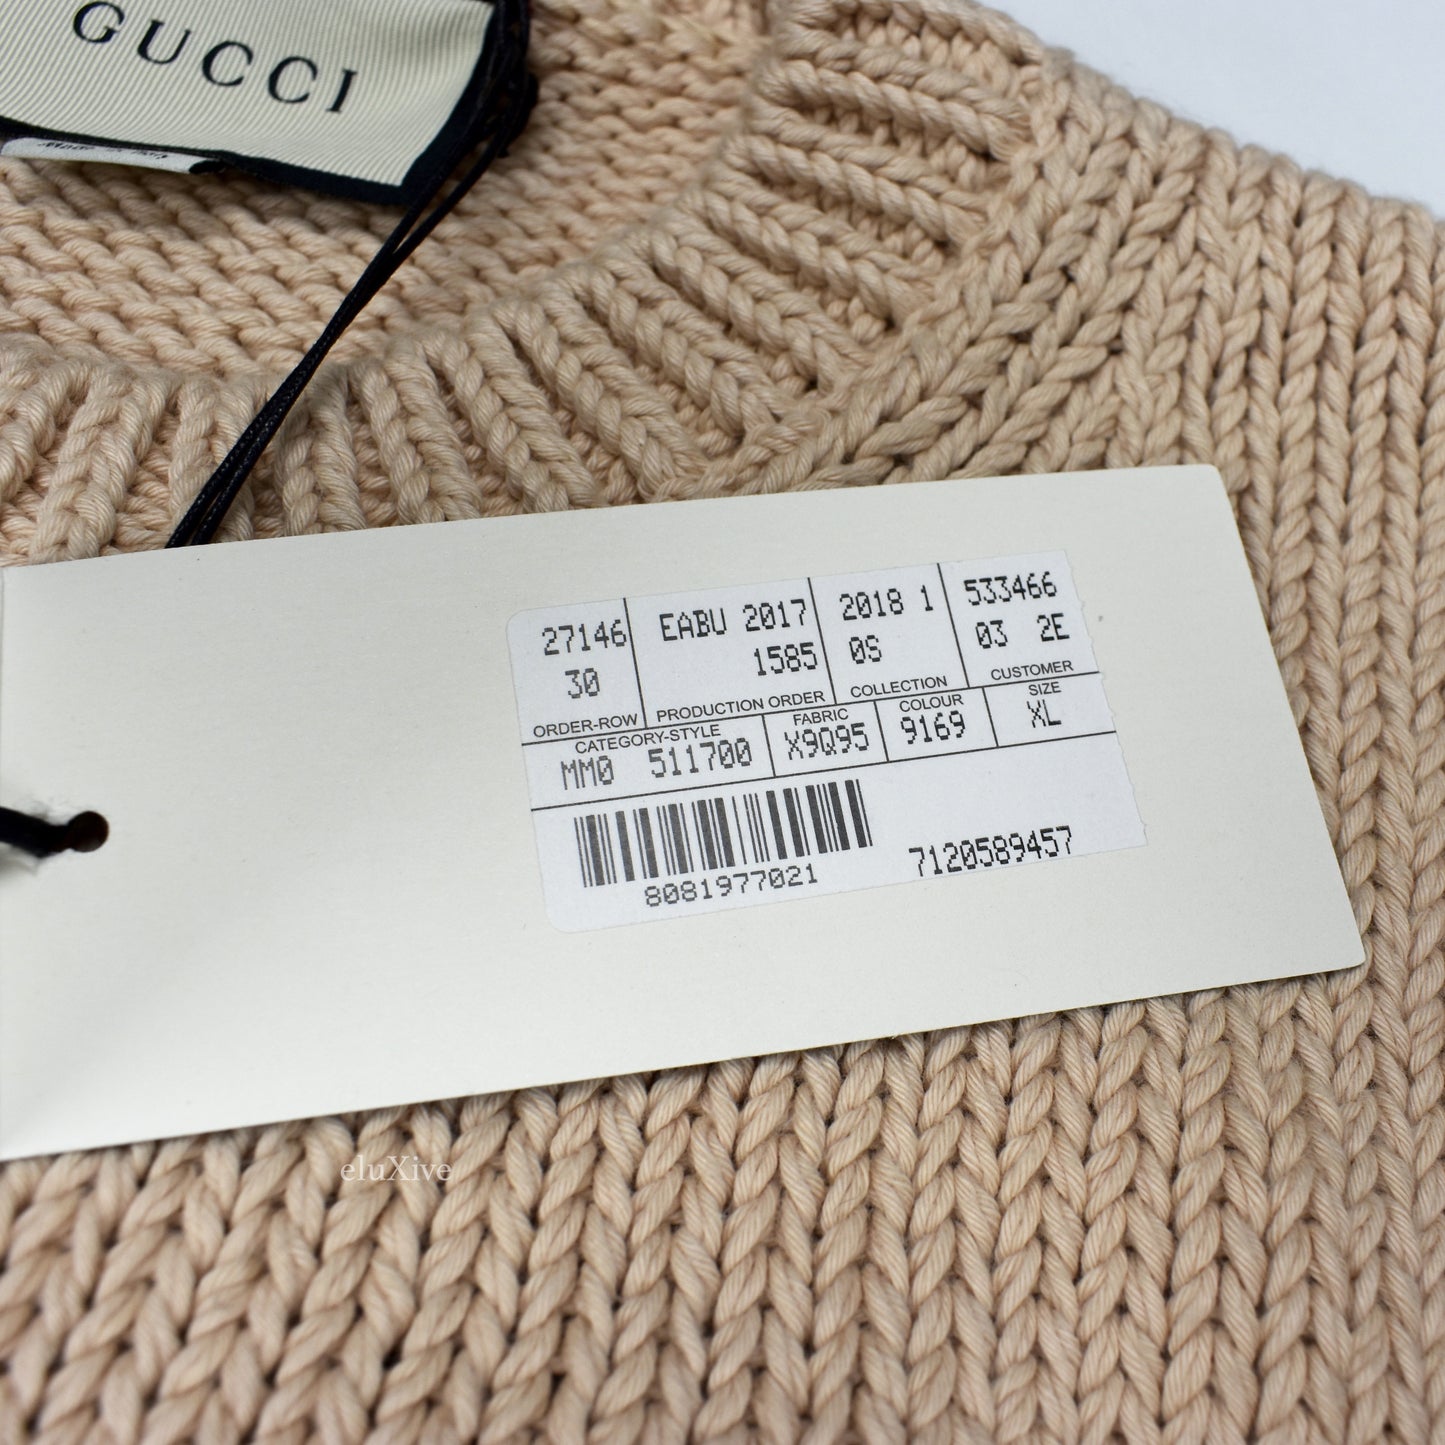 Gucci - 'Animal Magnetism' Lamb Knit Sweater (Beige)